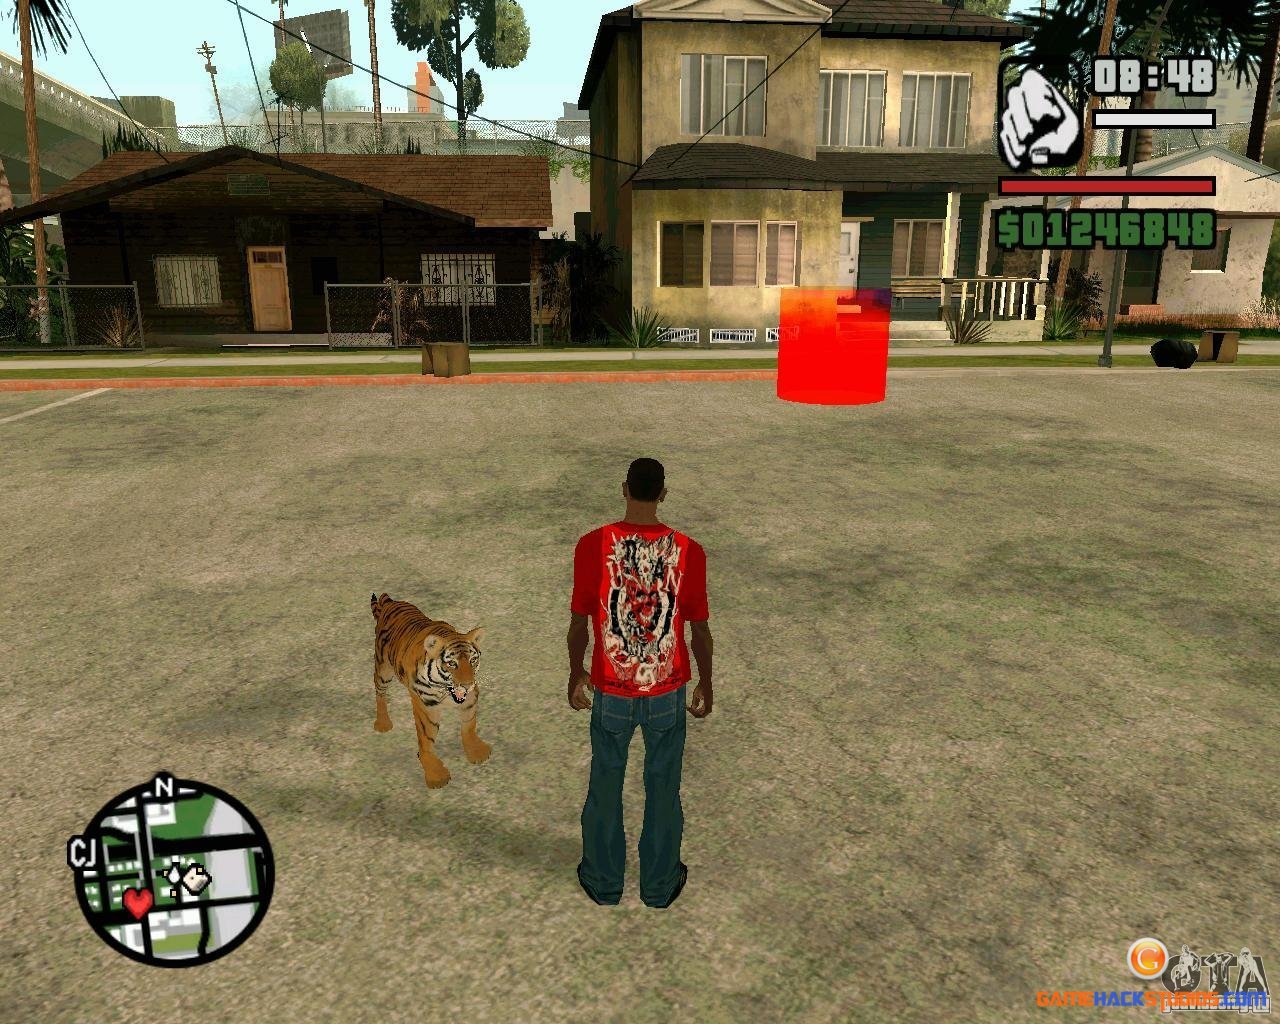 Download Gta San Andreas For Pc Free